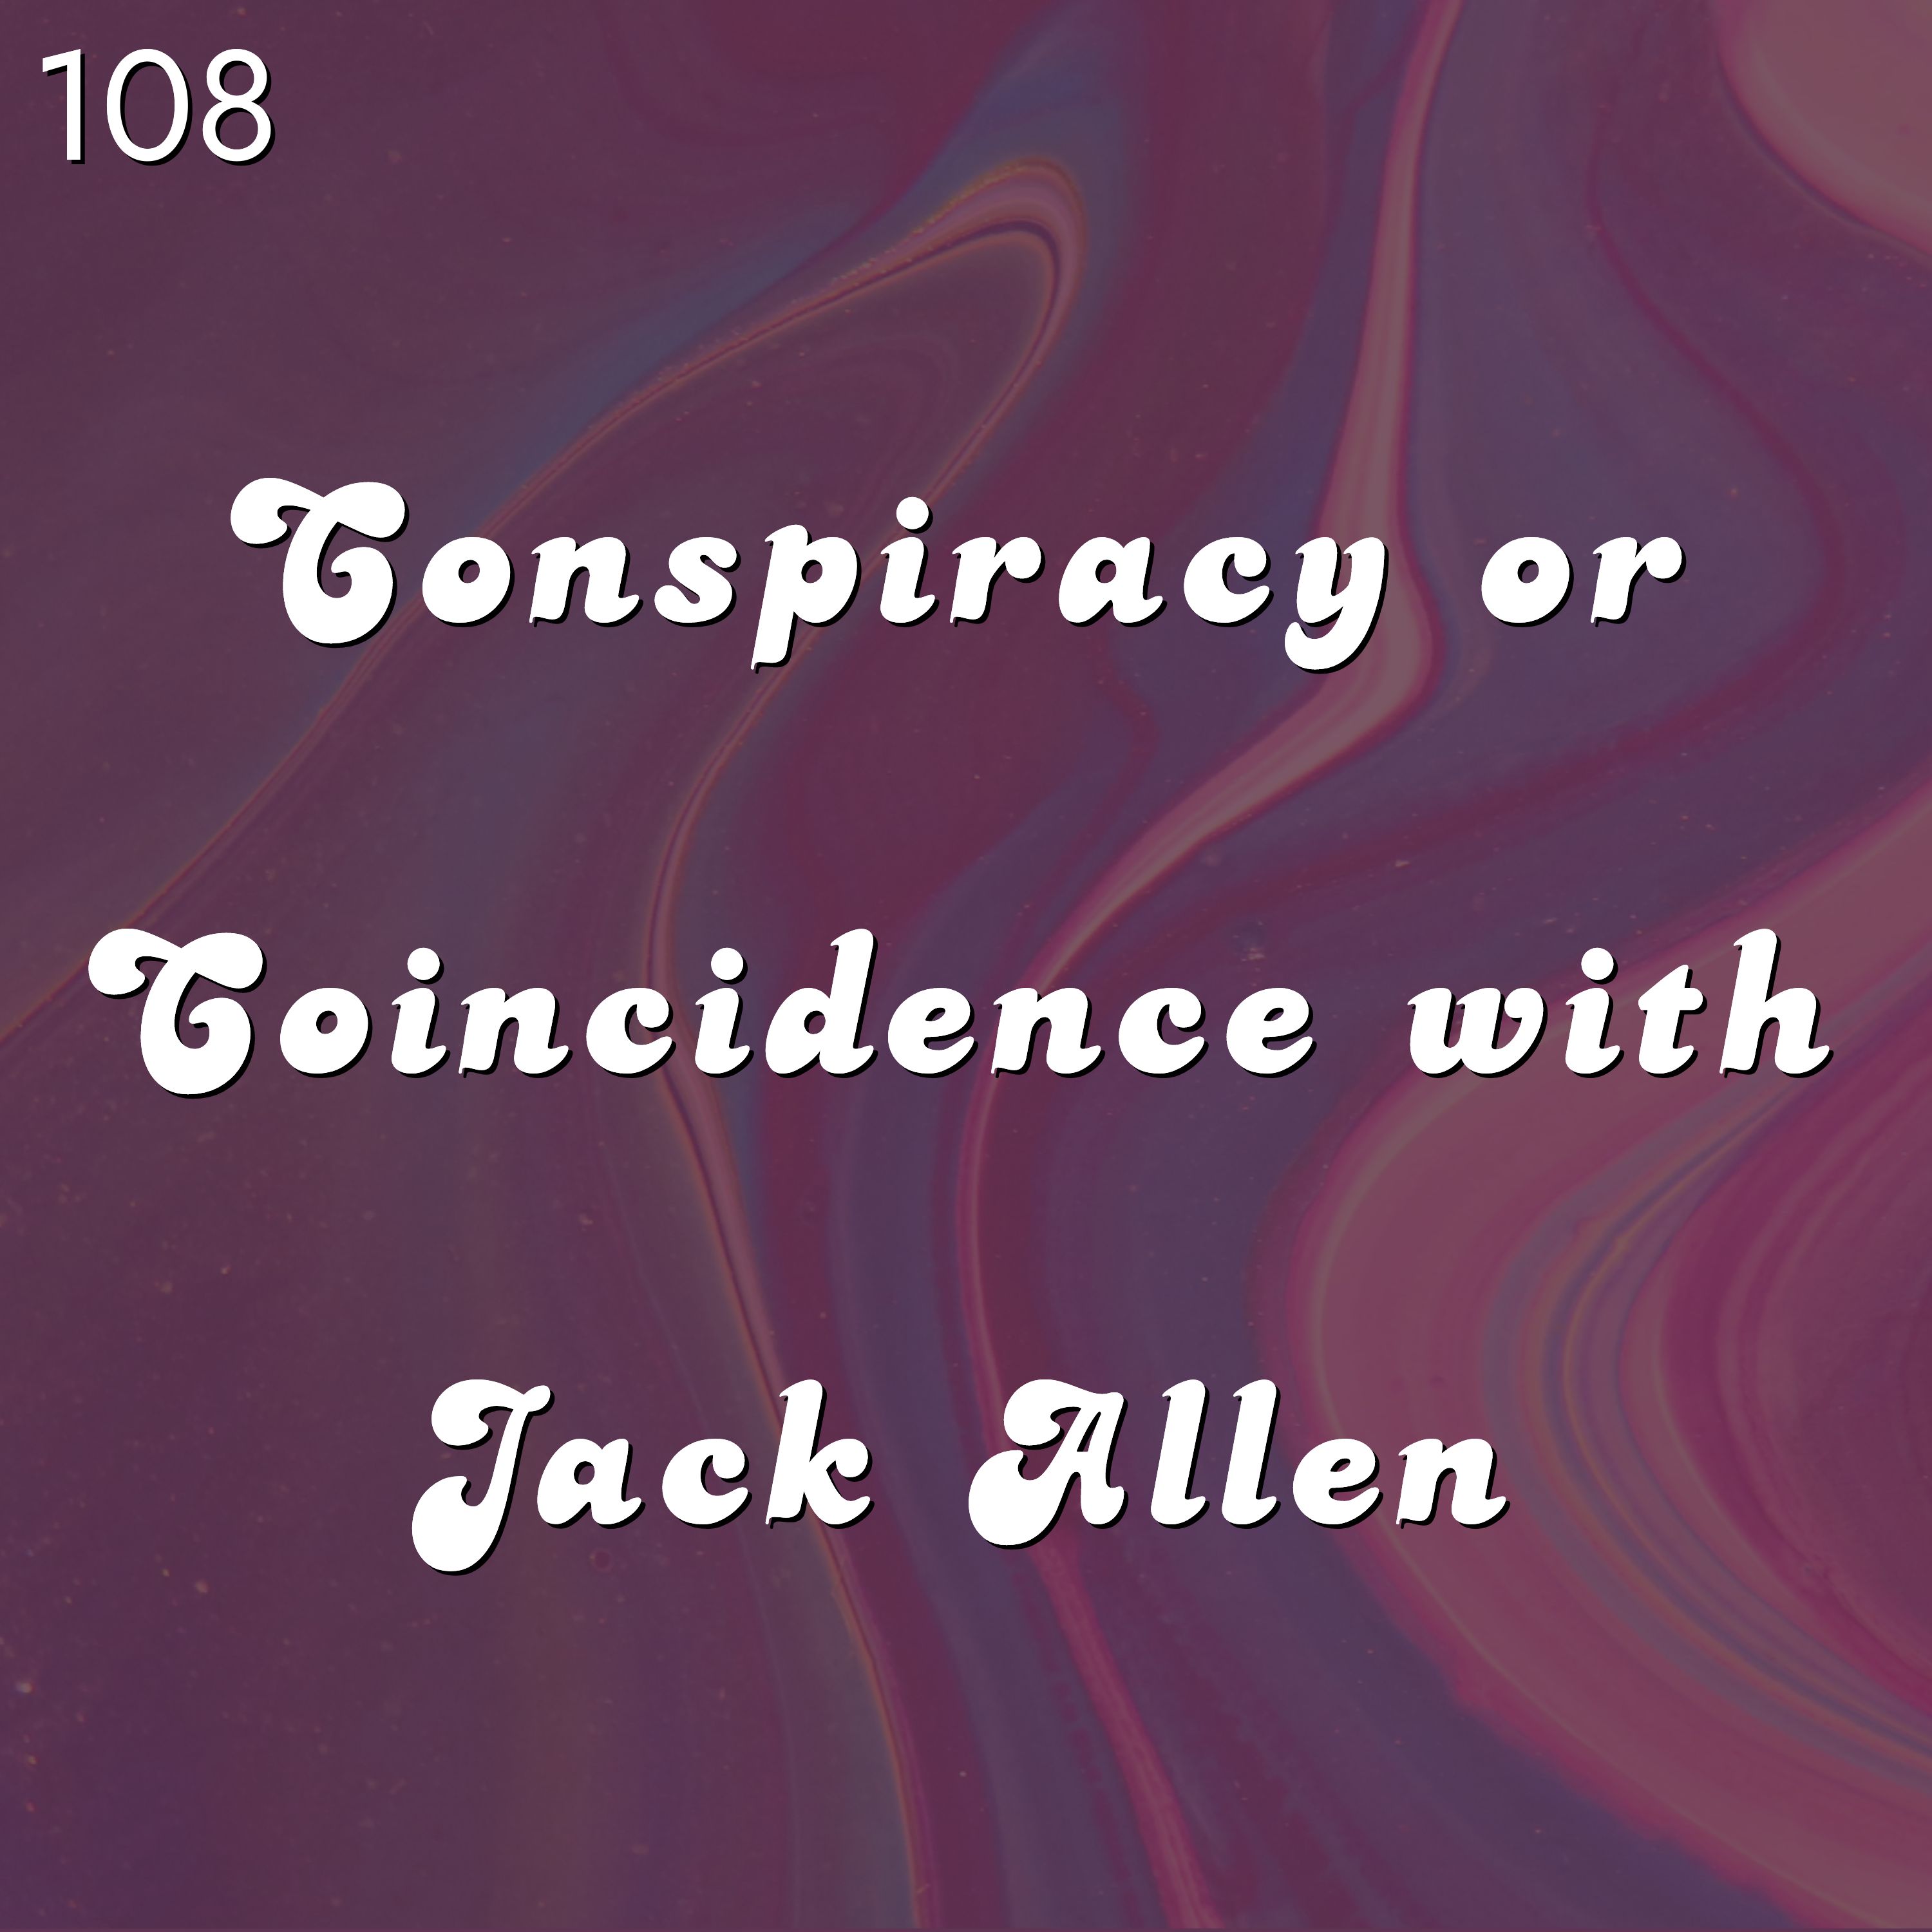 #108 - Conspiracy or Coincidence with Jack Allen